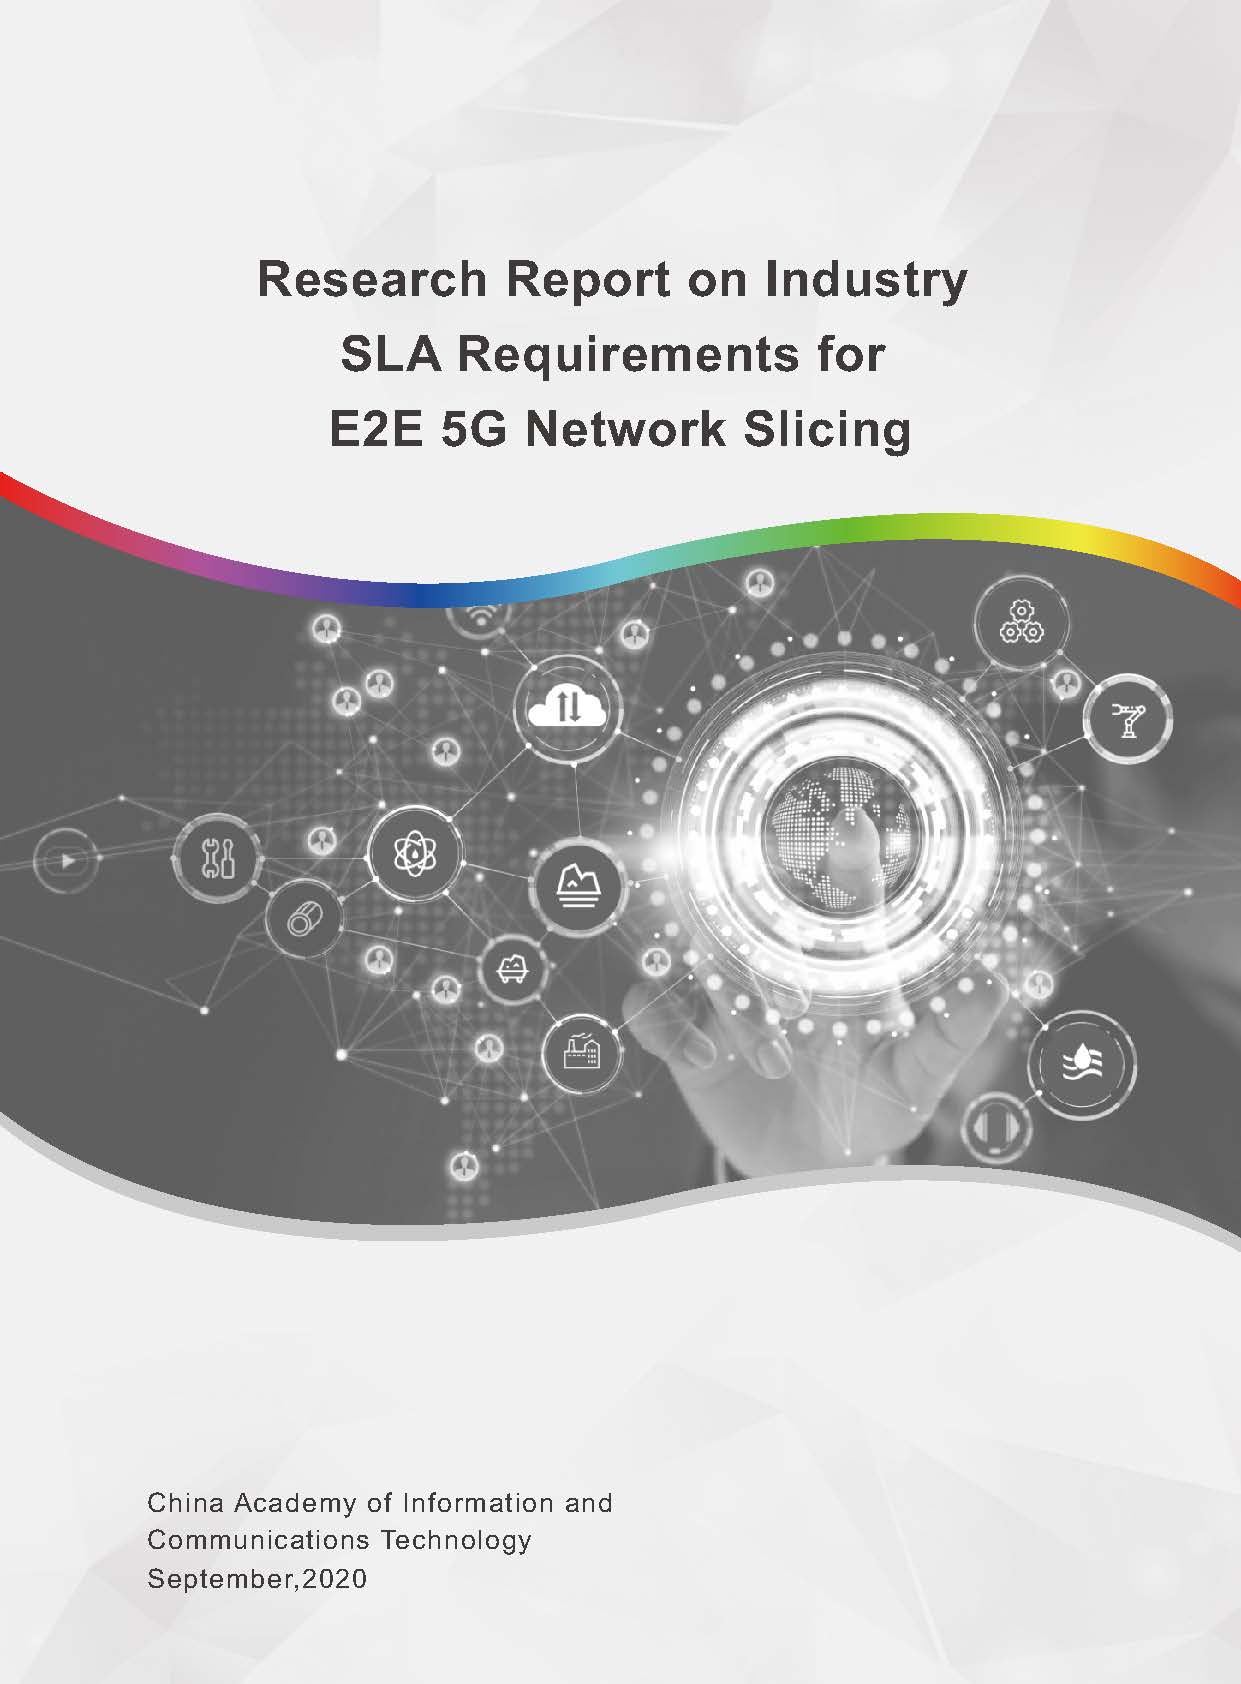 Research Report on Industry SLA Requirements for E2E 5G Network Slicing FP.jpg